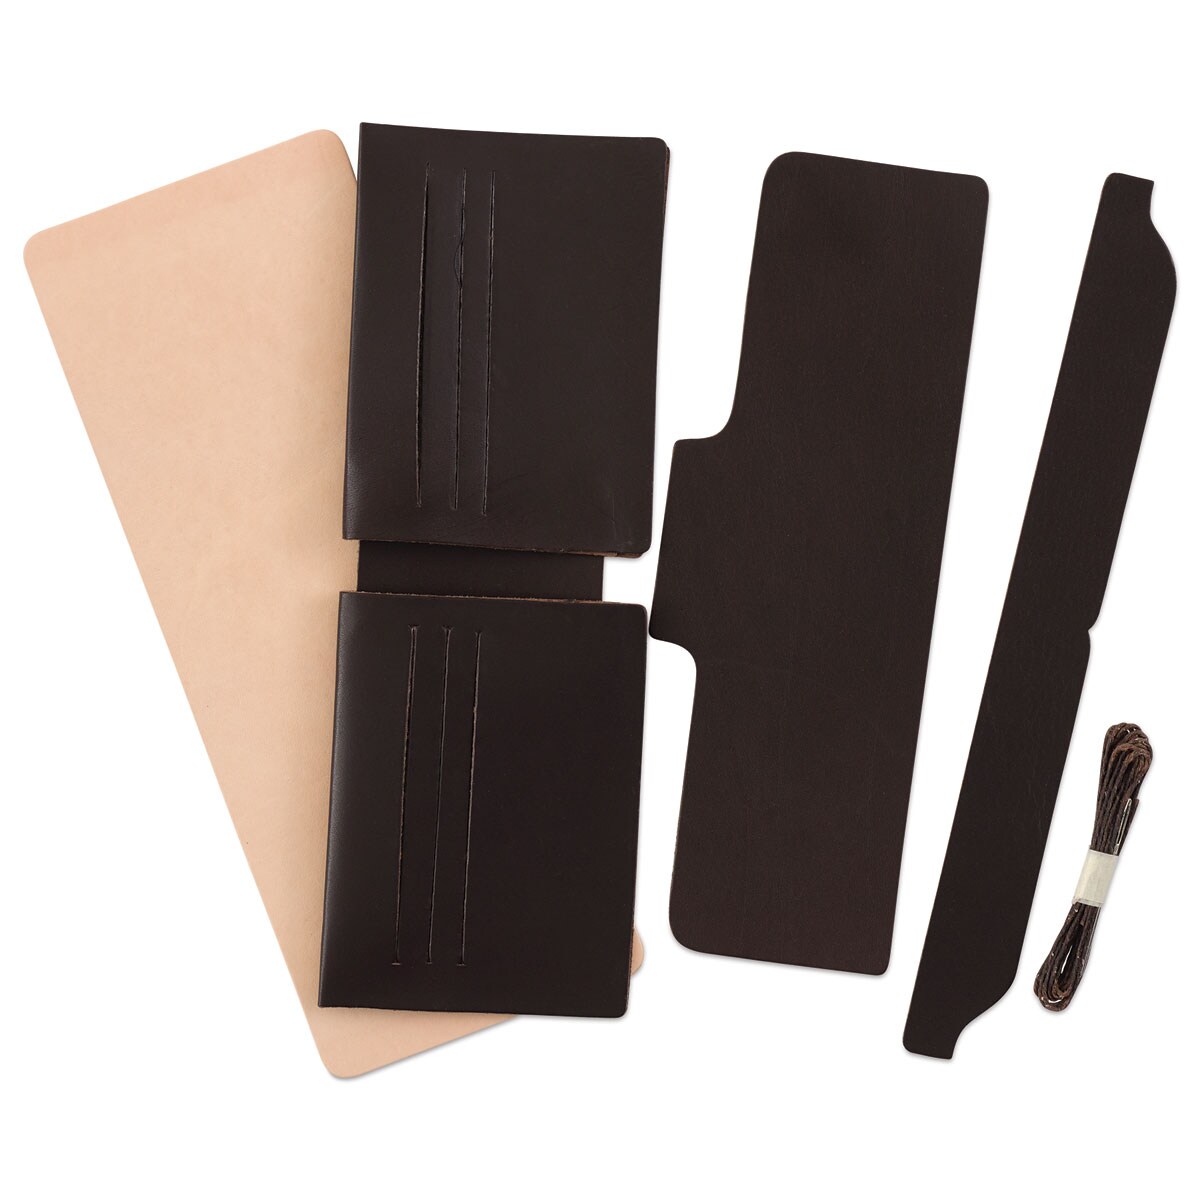 Realeather Leather Kit - Credit Card Wallet